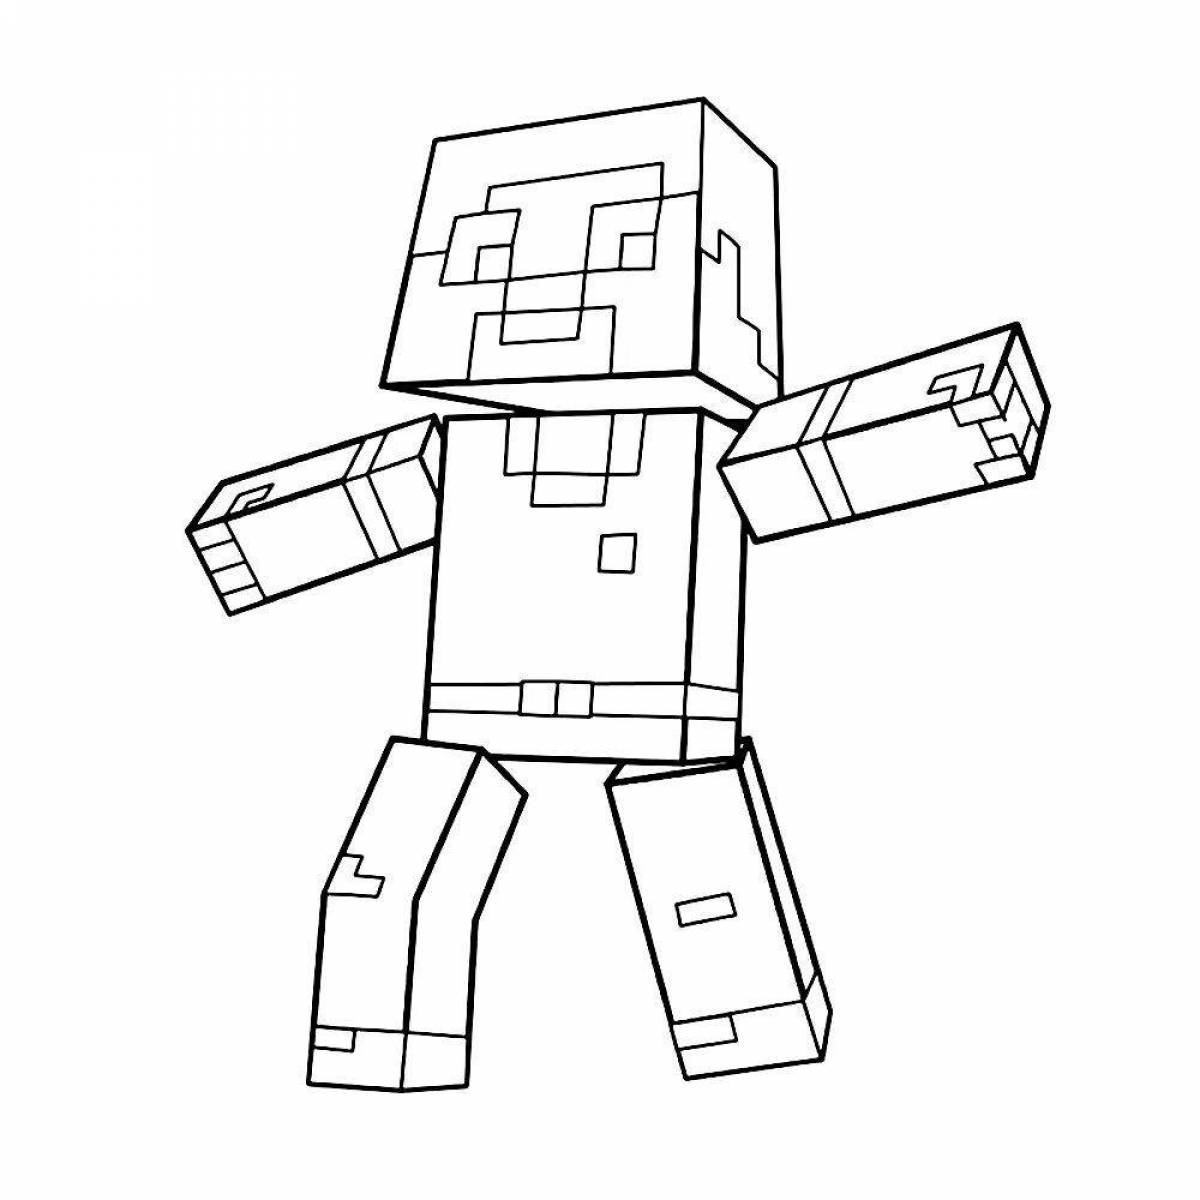 Minecraft men playful coloring page